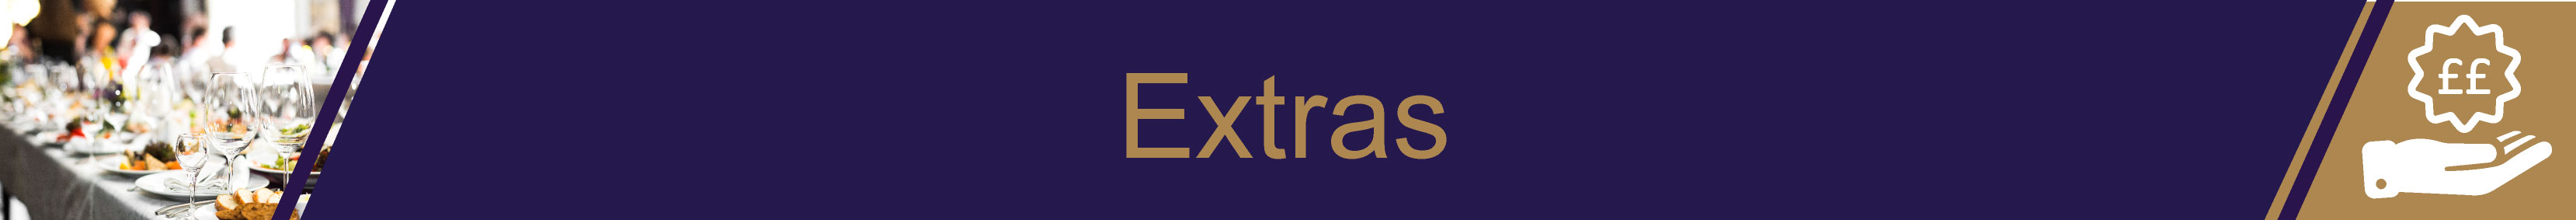 extras-banner